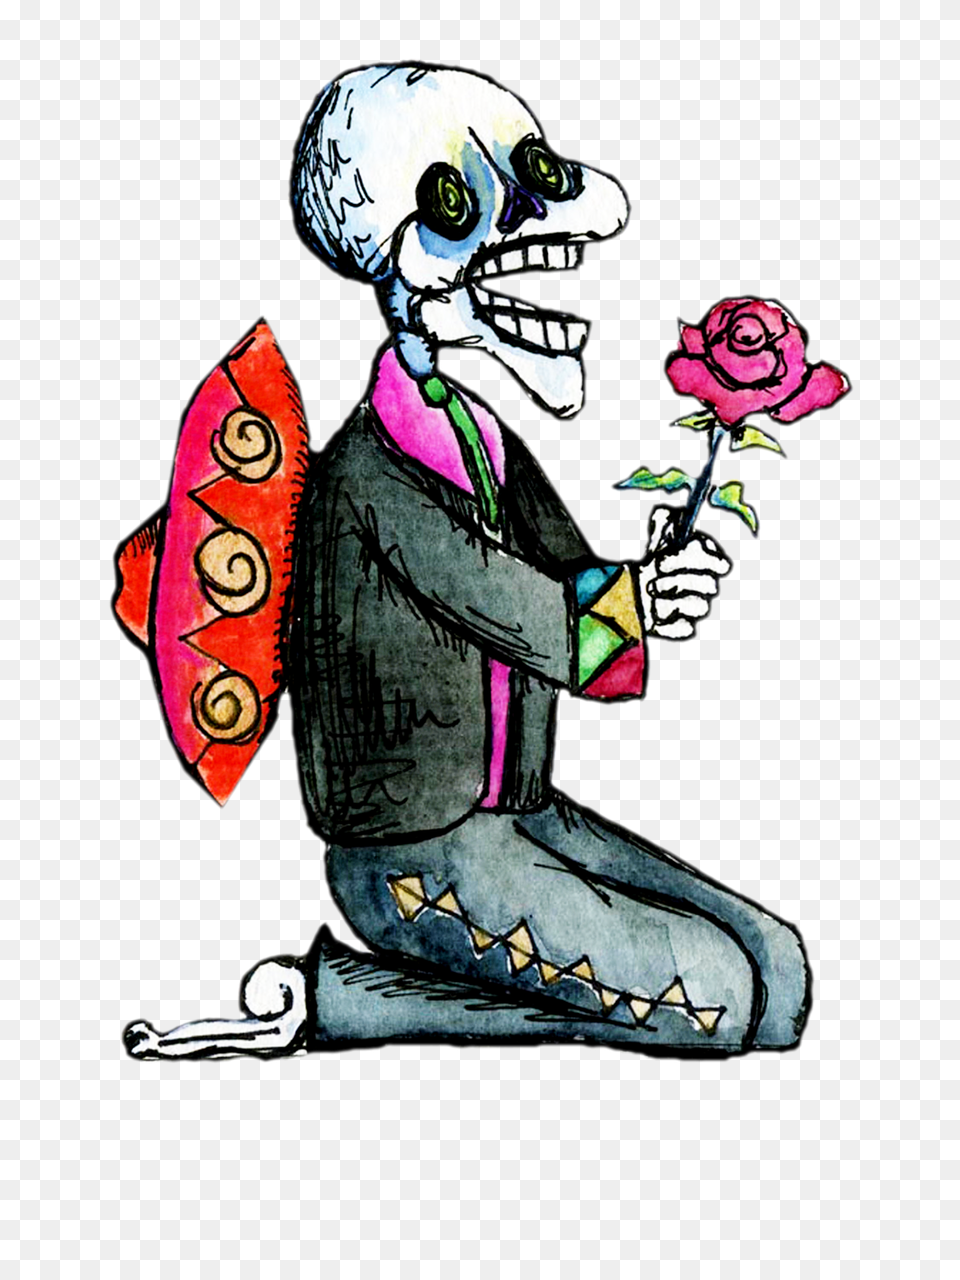 Mexico Day Of The Dead Dancer Mariachi Skeleton Hand Drawn Clip, Book, Comics, Publication, Art Free Transparent Png